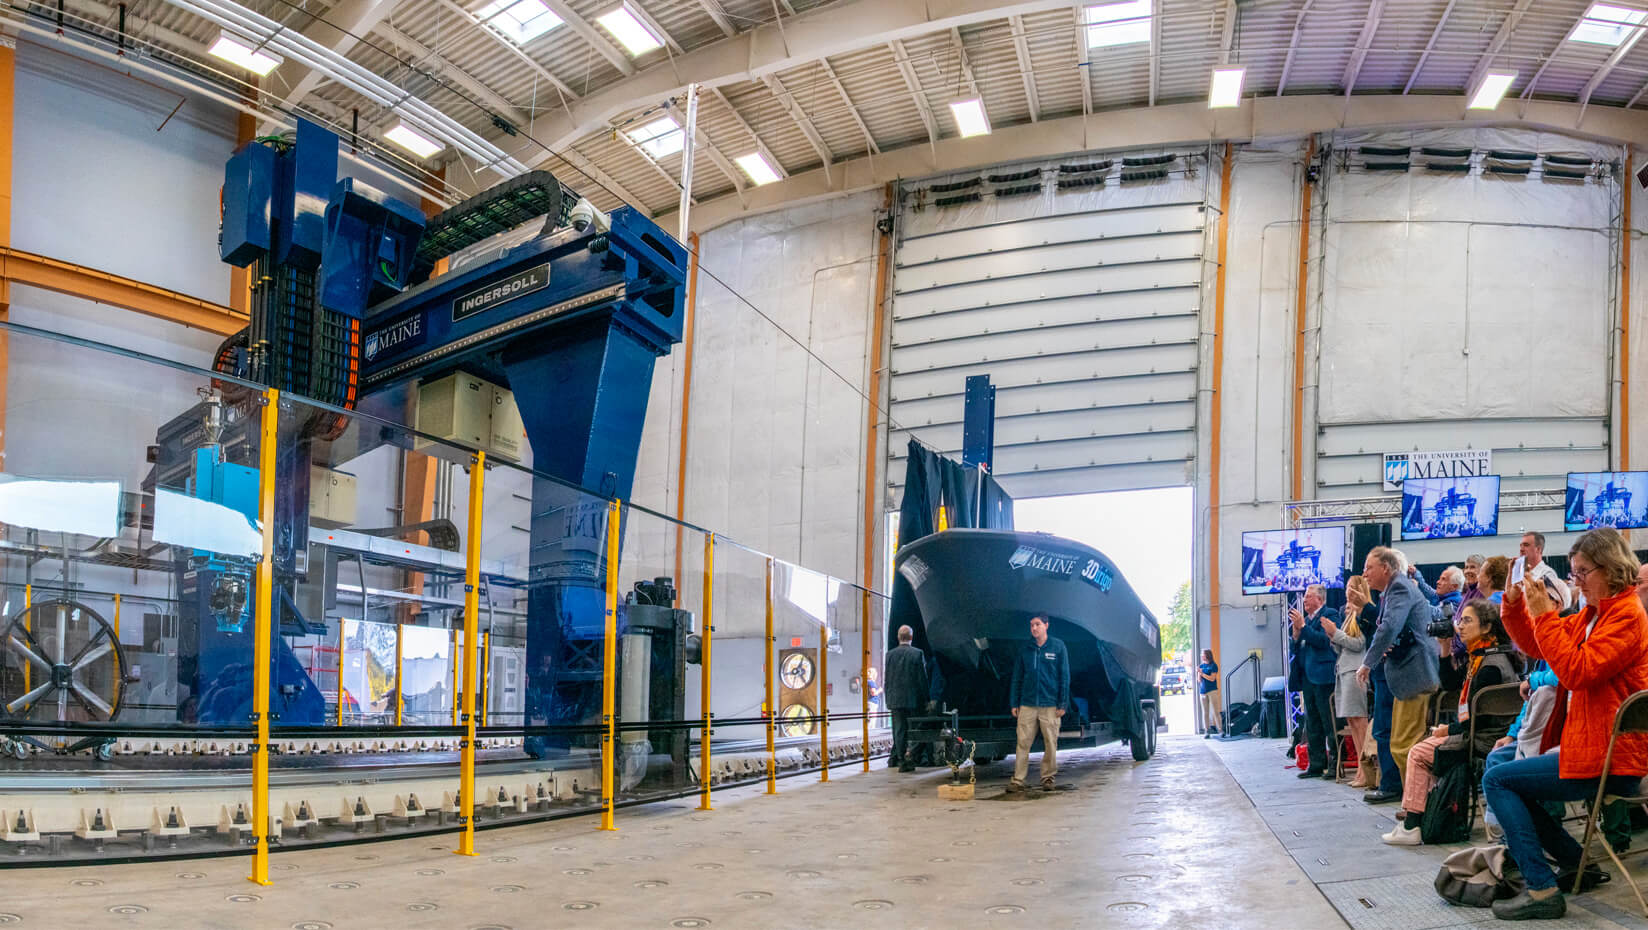 The world's largest polymer 3D printer and 3D printed boat. Photo via UMaine.